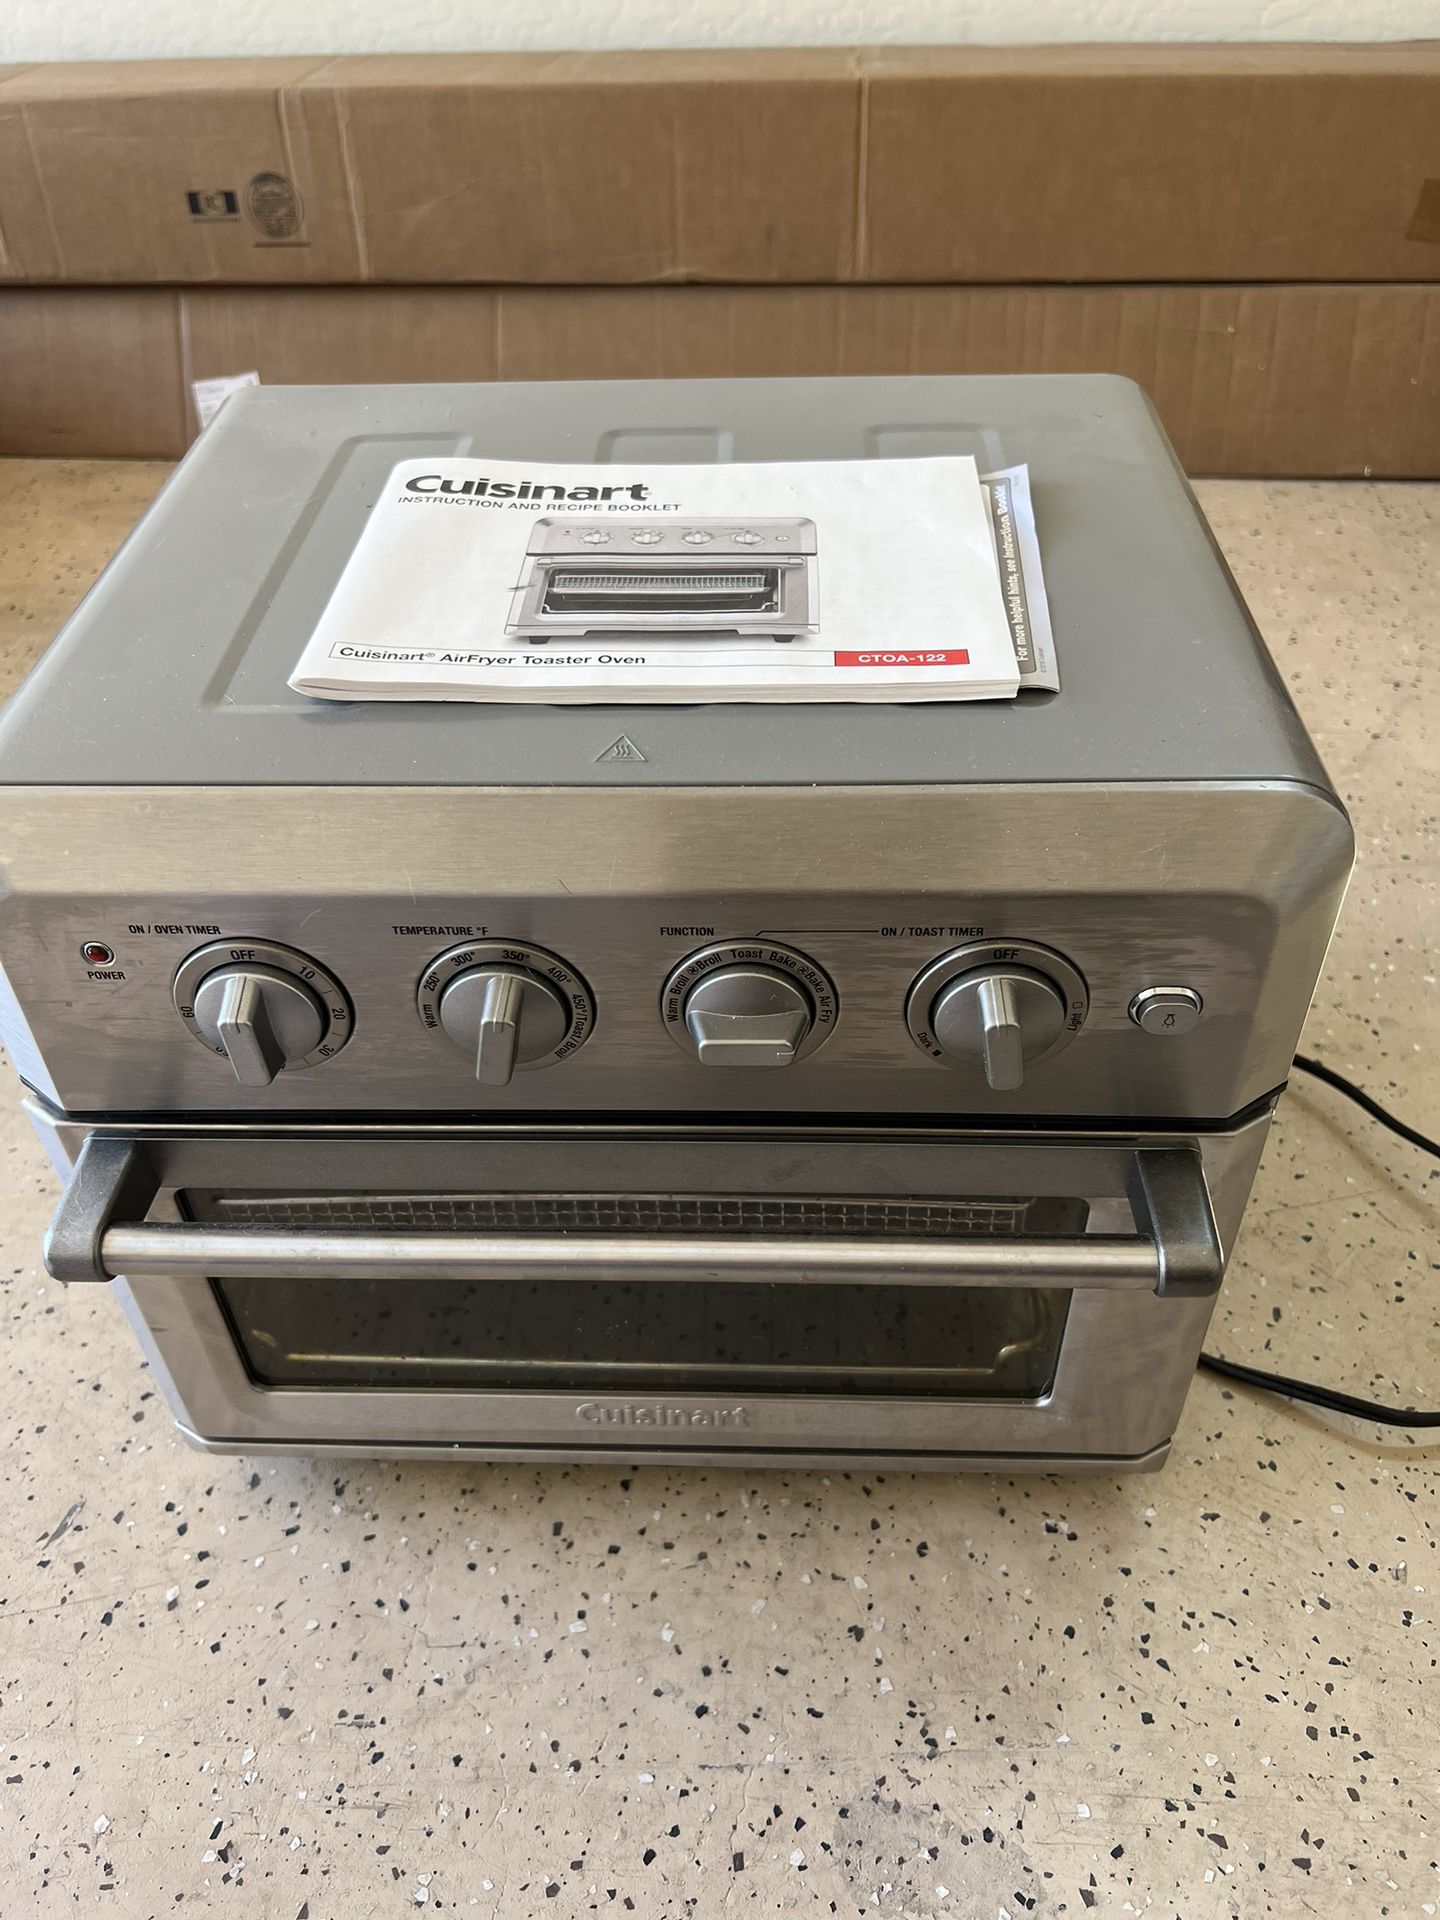 Cuisines Airfryer Toaster Oven - Works - Good Condition for Sale